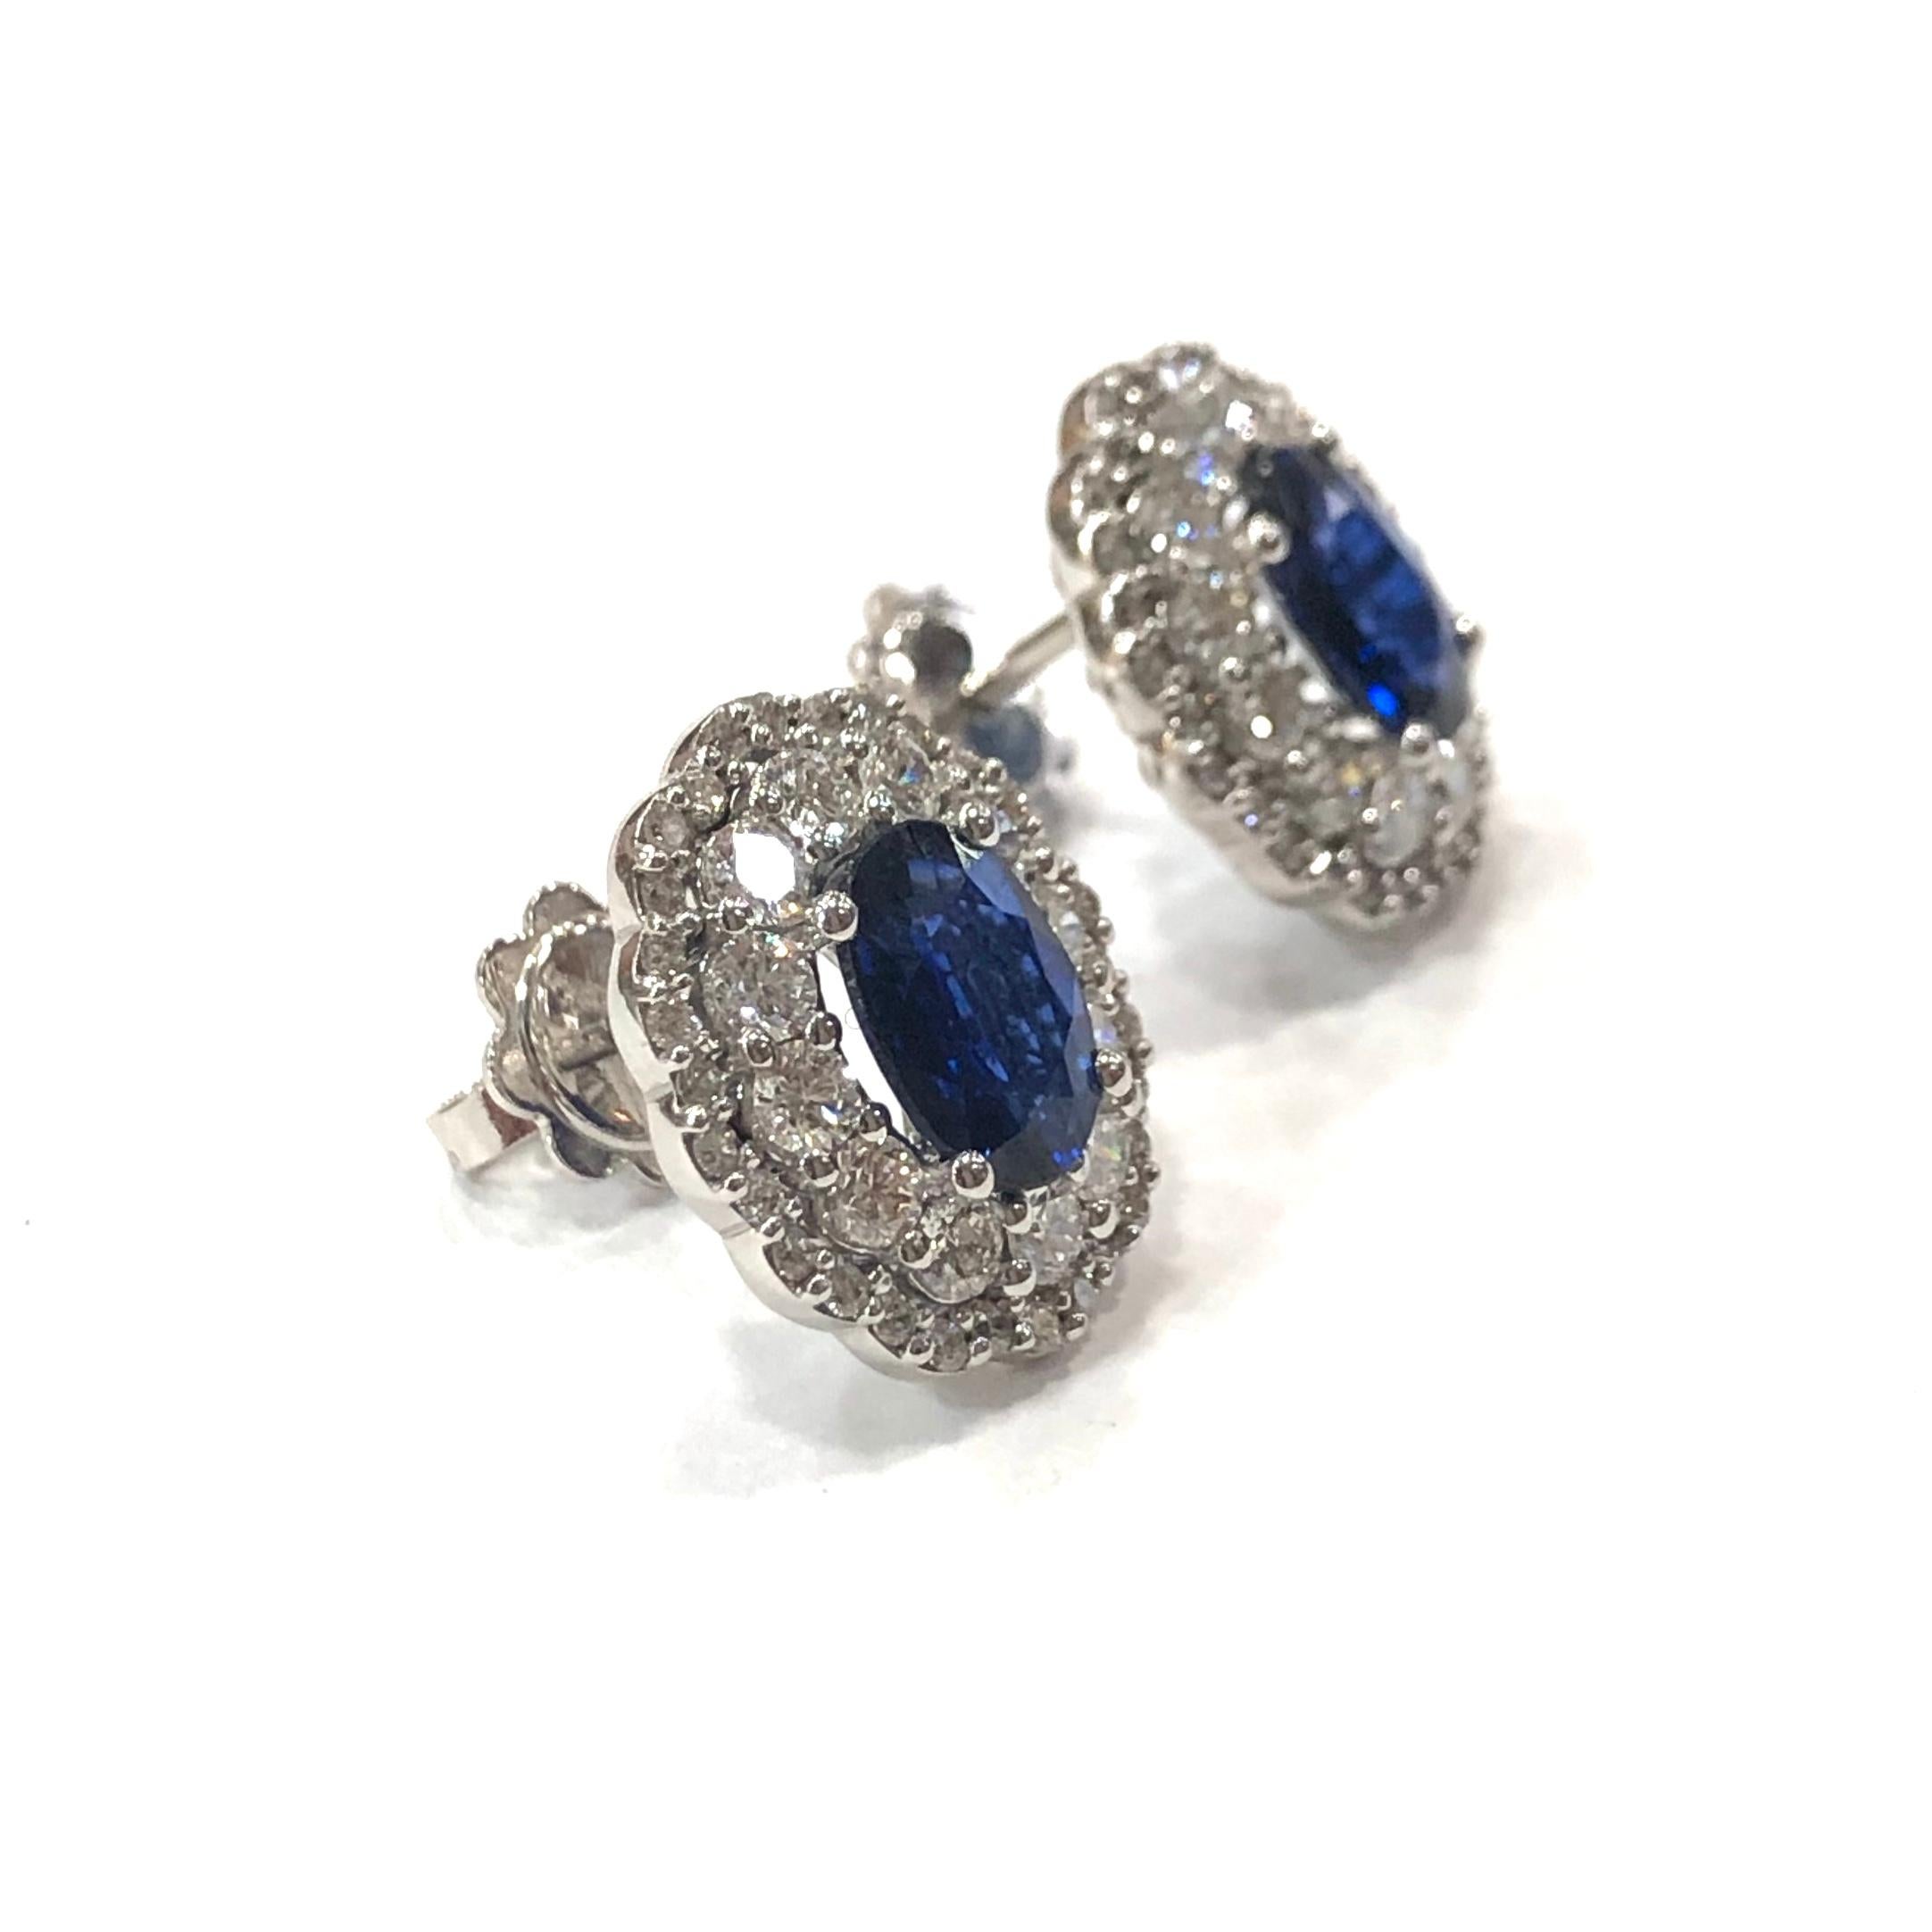 Large Edwardian Style Sapphire and Diamond Cluster Ear Studs. Each set with one central large 7 x 5mm blue untreated natural sapphire in a four claw setting, surrounded by two rows of round brilliant cut Diamonds in a filigree style design. With a